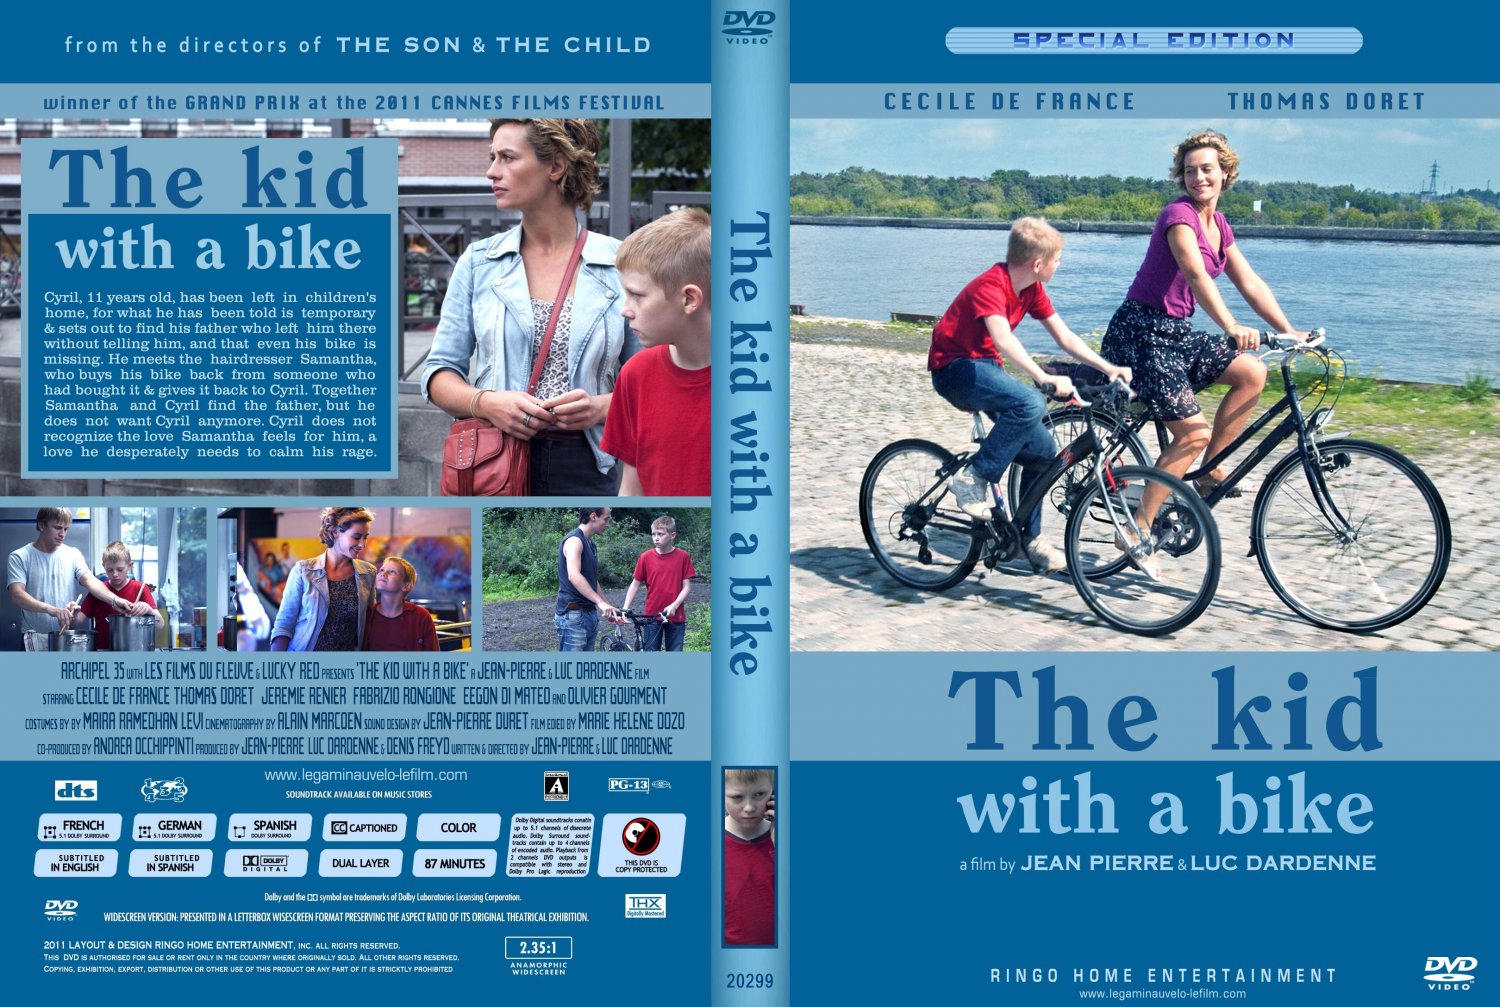 The Kid with a Bike DVD